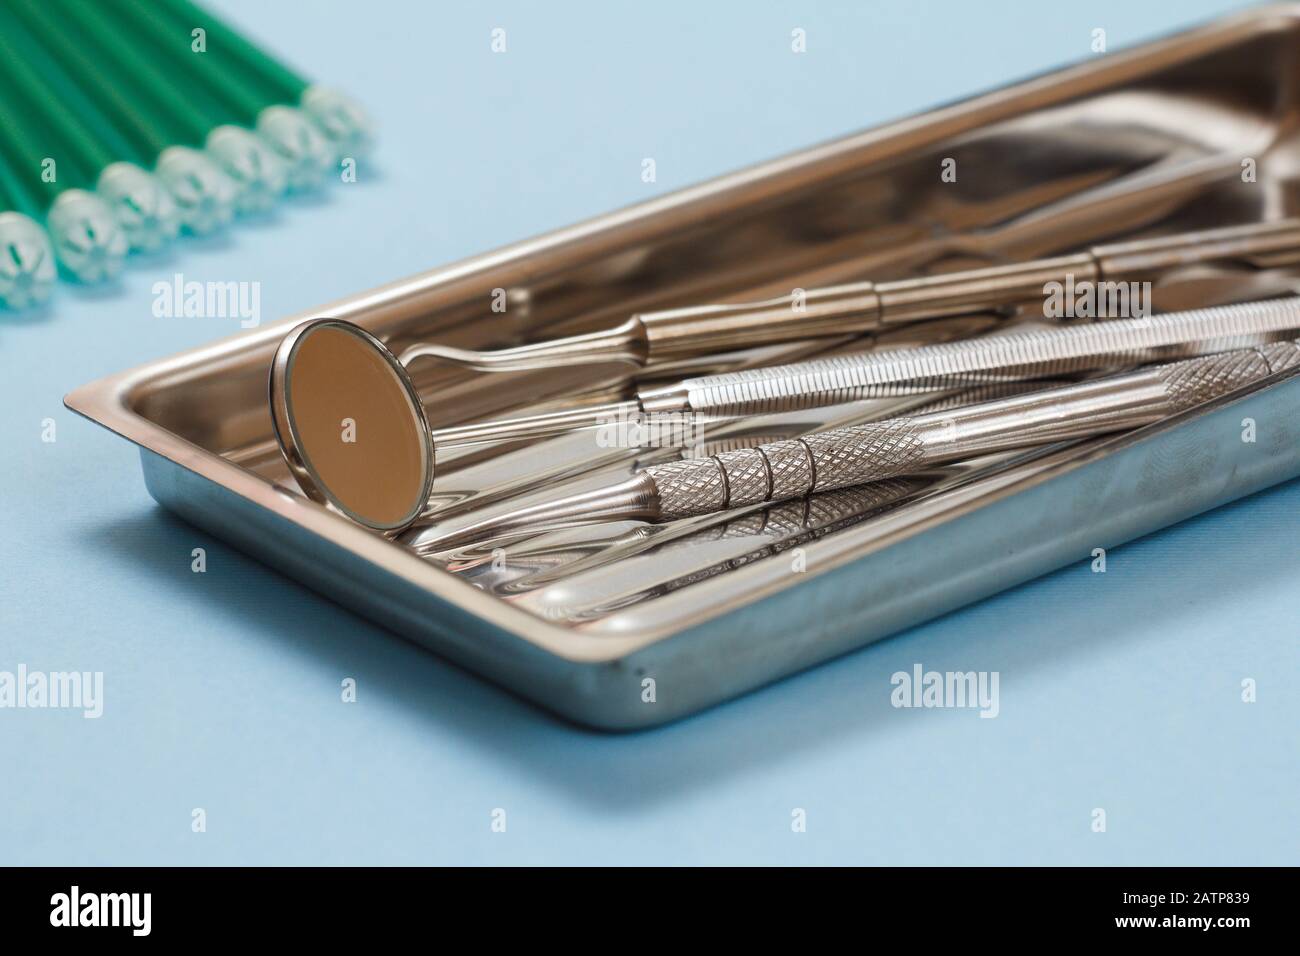 Set of metal dental instruments for dental treatment and saliva ejectors. Medical tools in stainless steel tray on blue background. Stock Photo